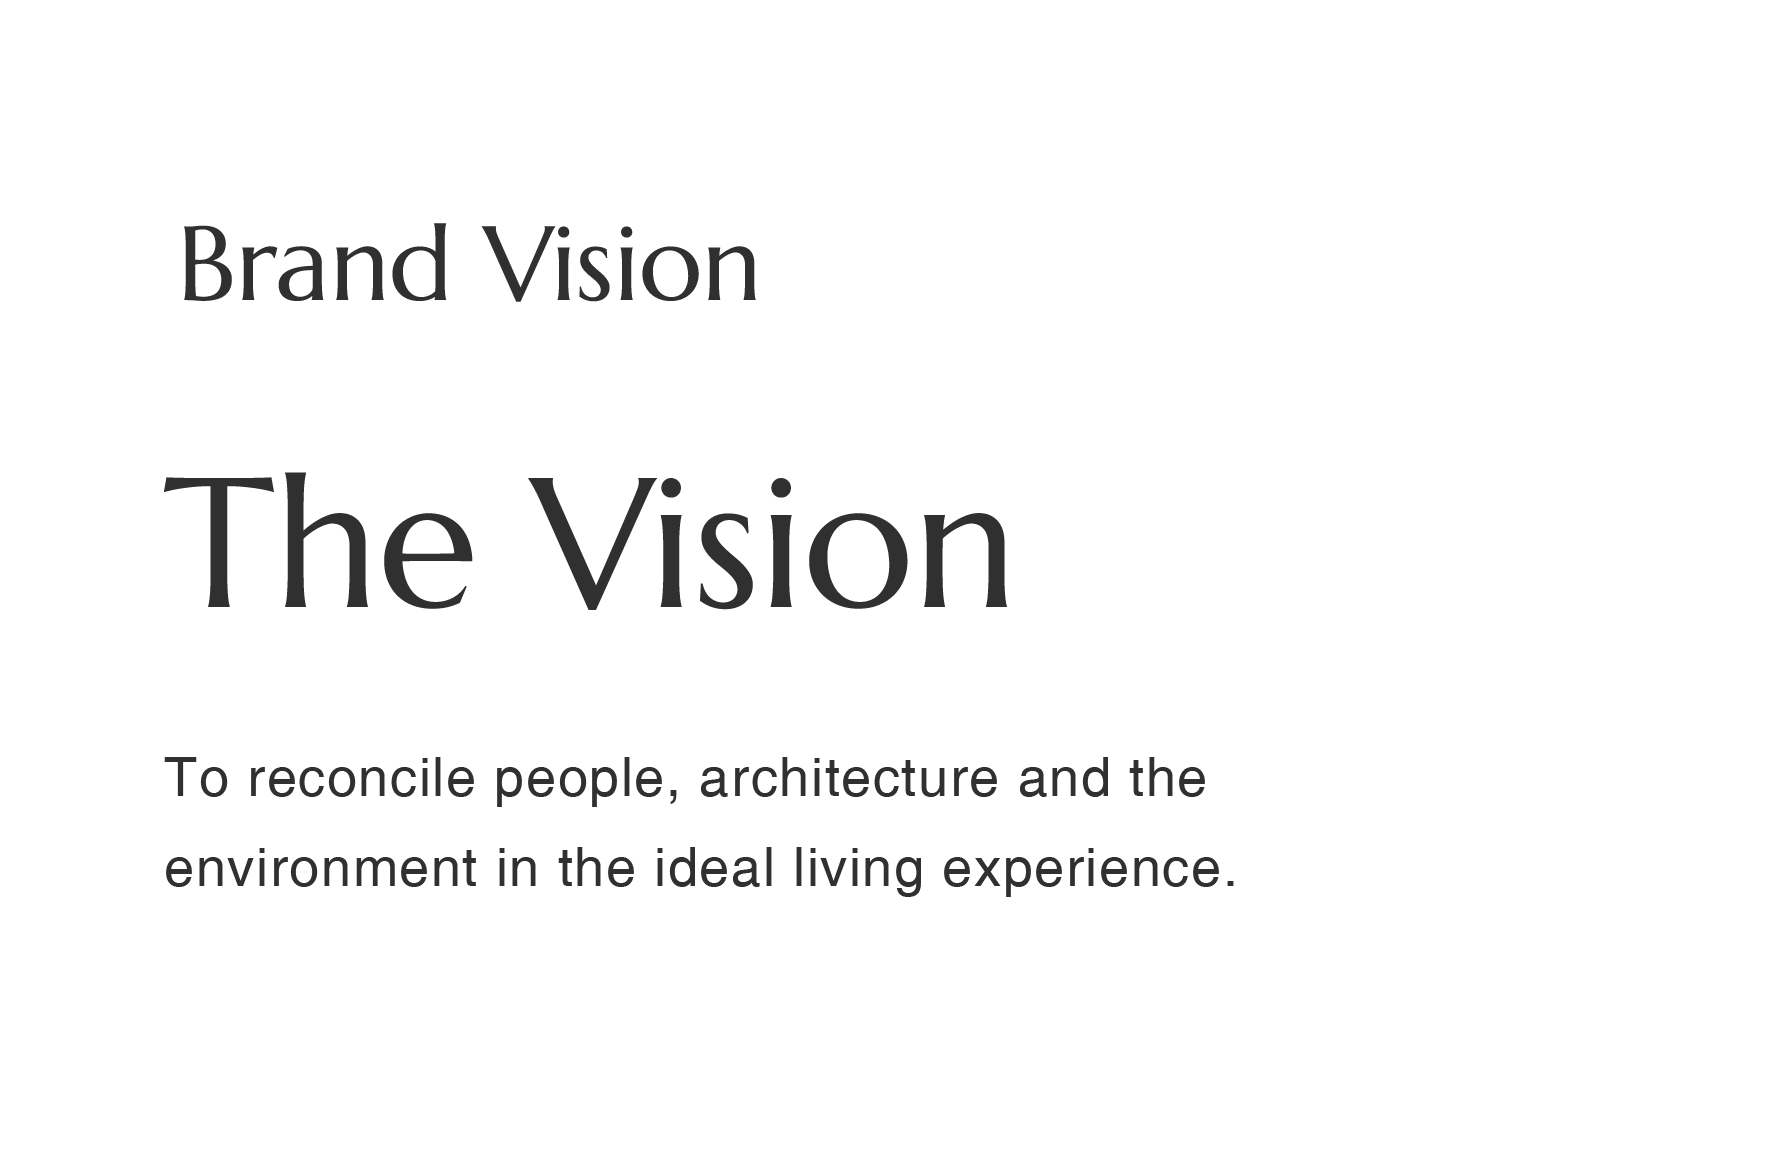 To reconcile people, architecture and the environment in the ideal living experience.